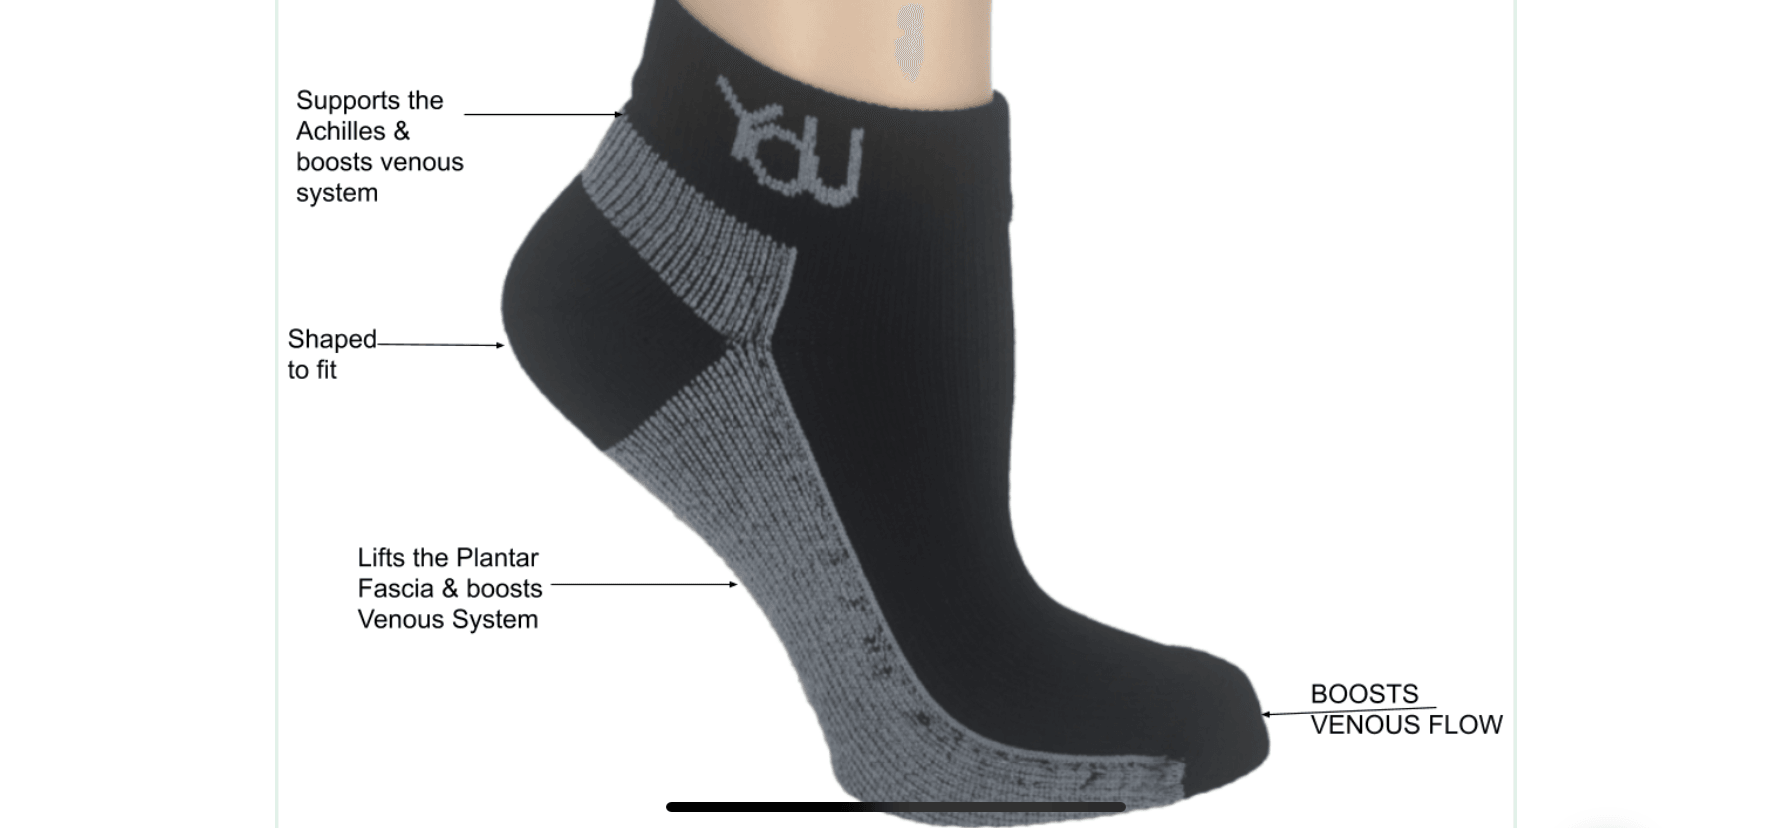 Cushioned Compression Socks - Ankle Cut - 6681199-S-1520 Cushioned Compression Socks - Ankle Cut - undefined by Supply Physical Therapy 15-20 mmhg, Compression socks